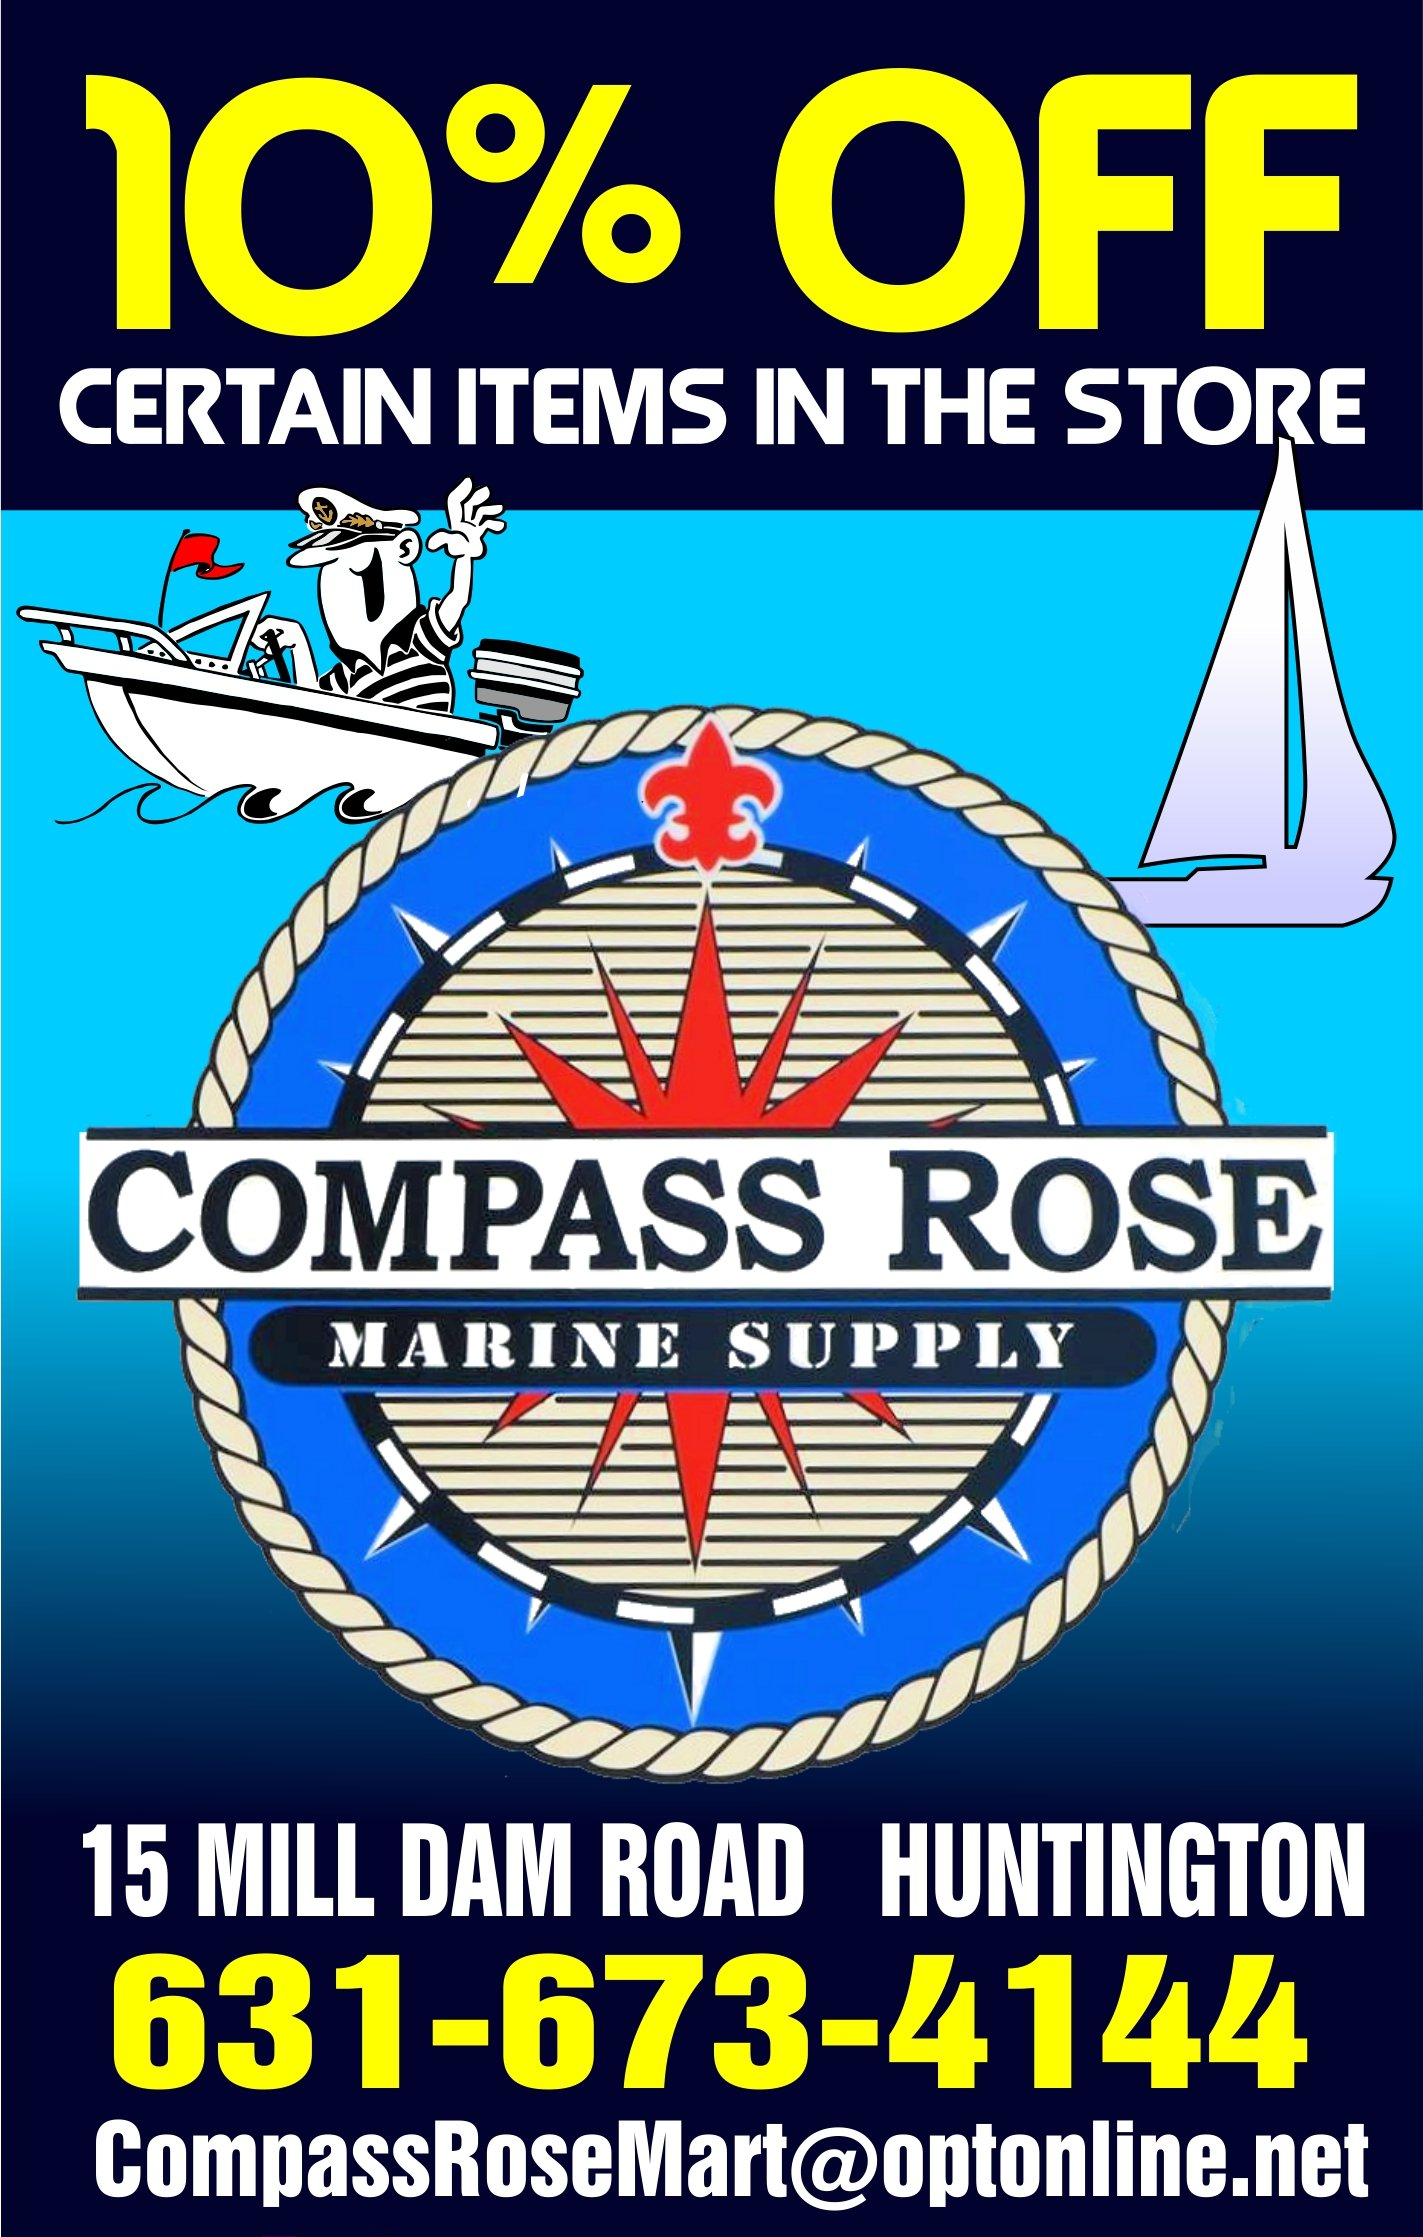 An advertisement for compass rose marine supply offers 10 % off